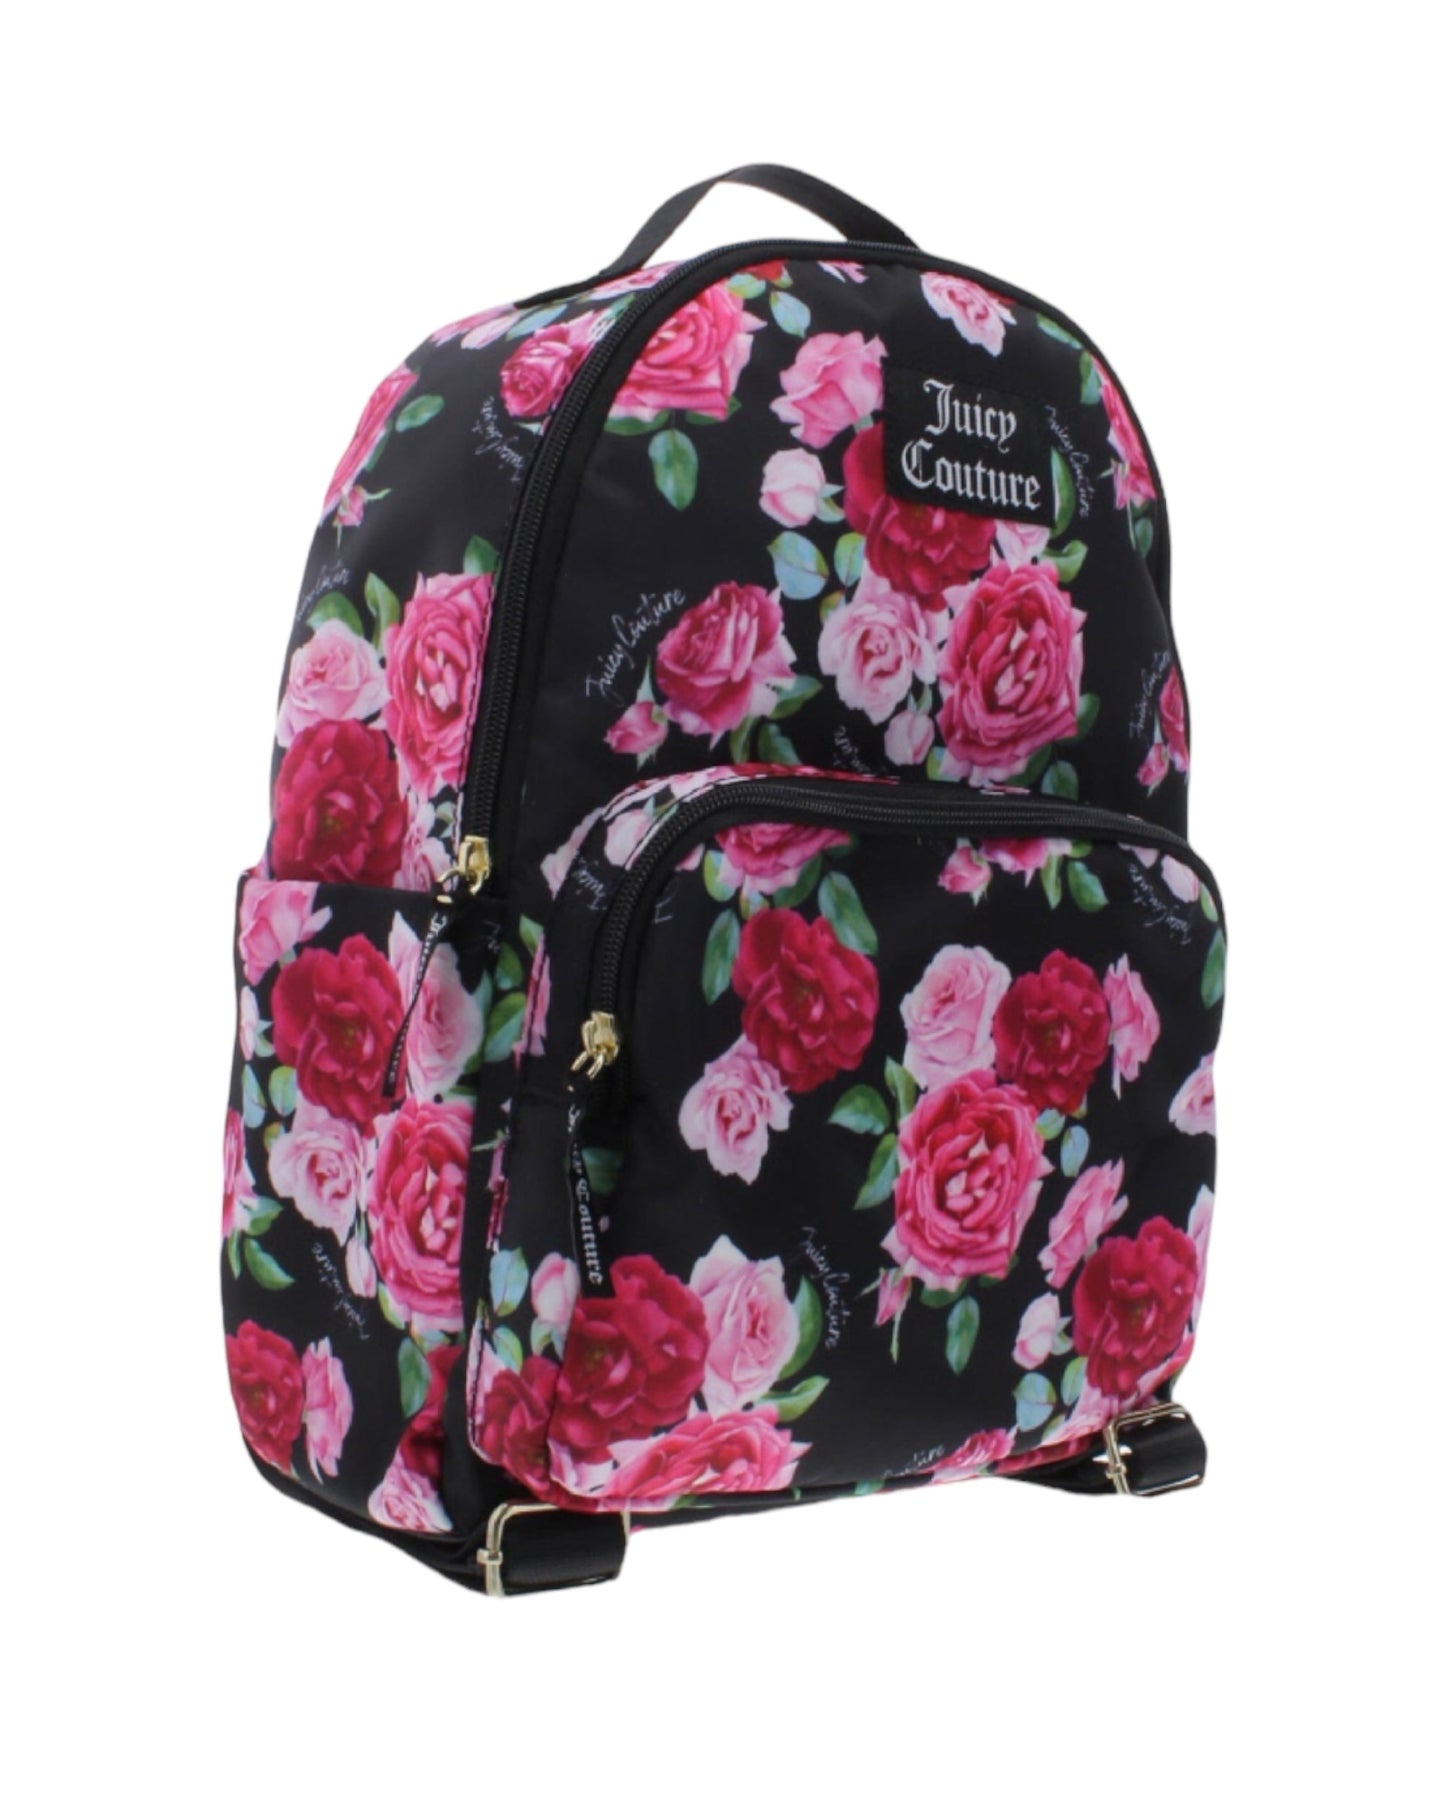 Juicy Couture Sport Yourself Backpack